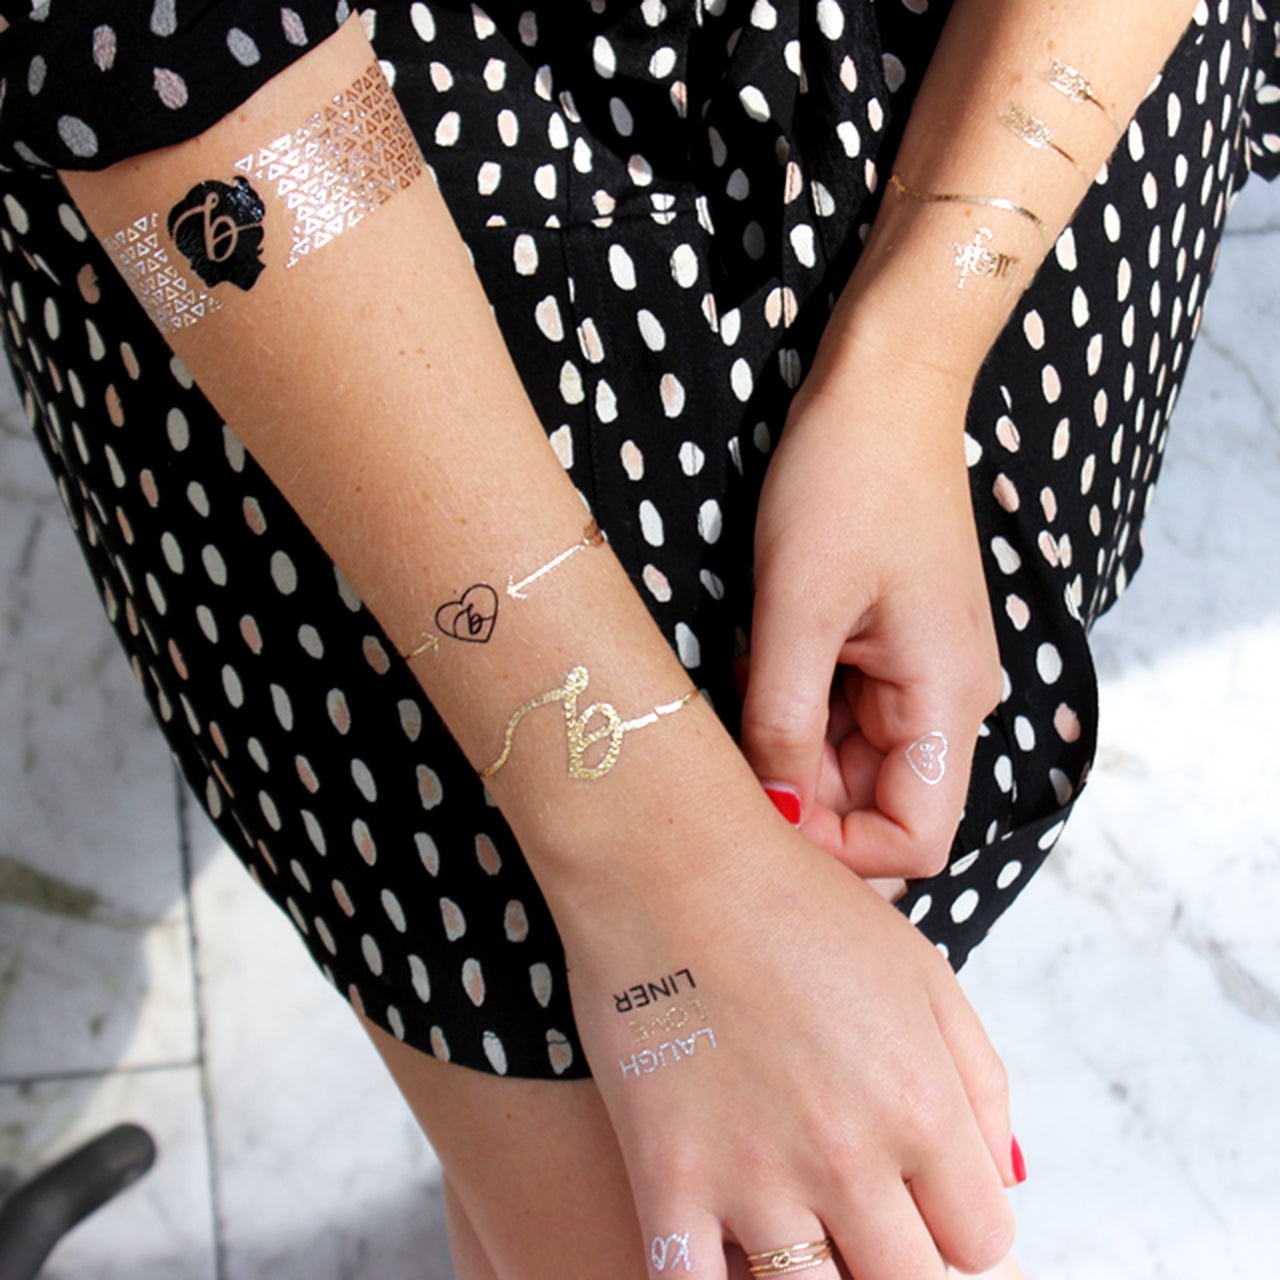 How to make custom temporary tattoos from a photo | Blog | Sticker Mule  India